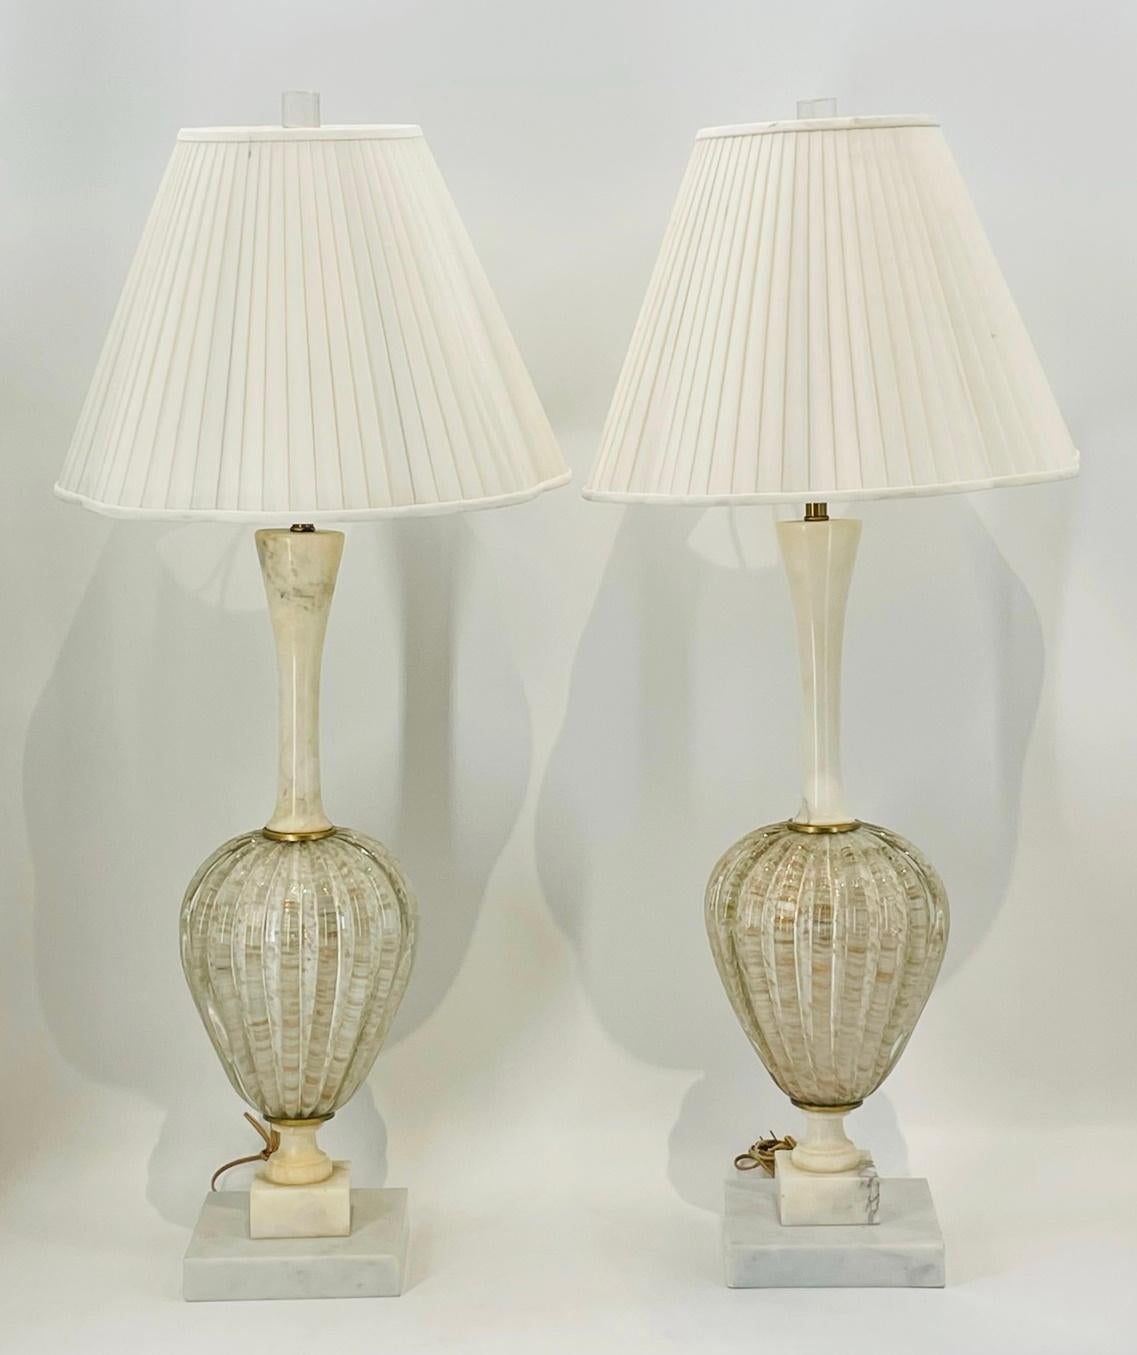 Introducing our exquisite Pair of Murano Glass & Alabaster Table Lamps, straight from Italy's artistic heritage of the 1960s. These captivating lamps effortlessly blend the timeless beauty of alabaster with the intricate craftsmanship of Murano